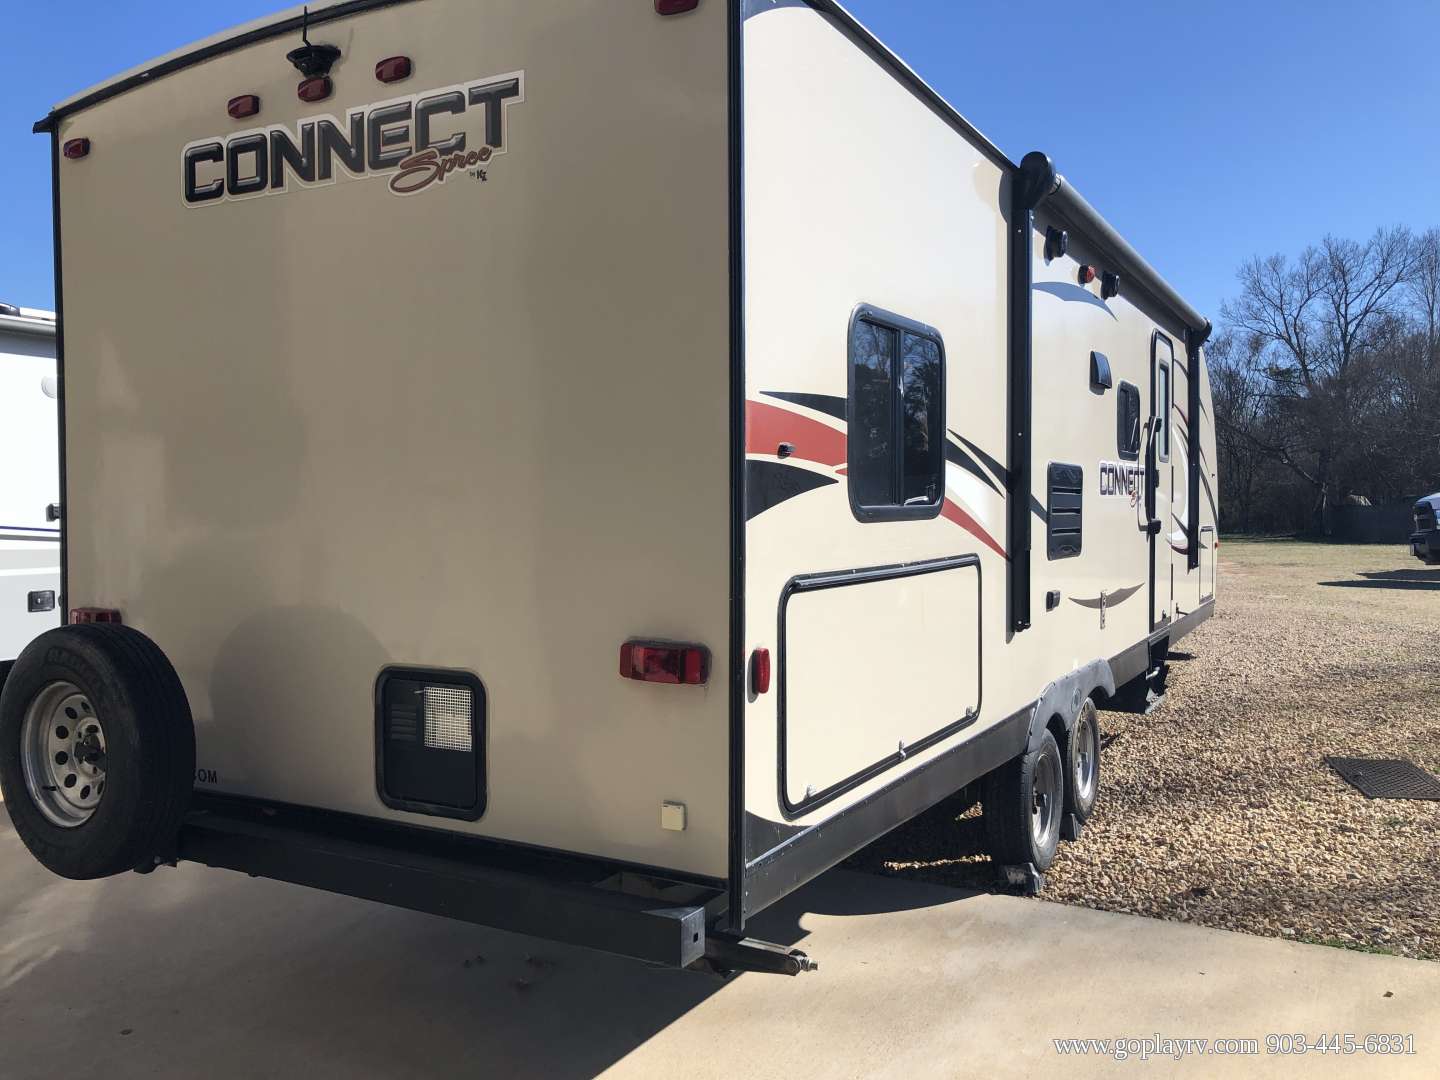 2015 connect spree travel trailer